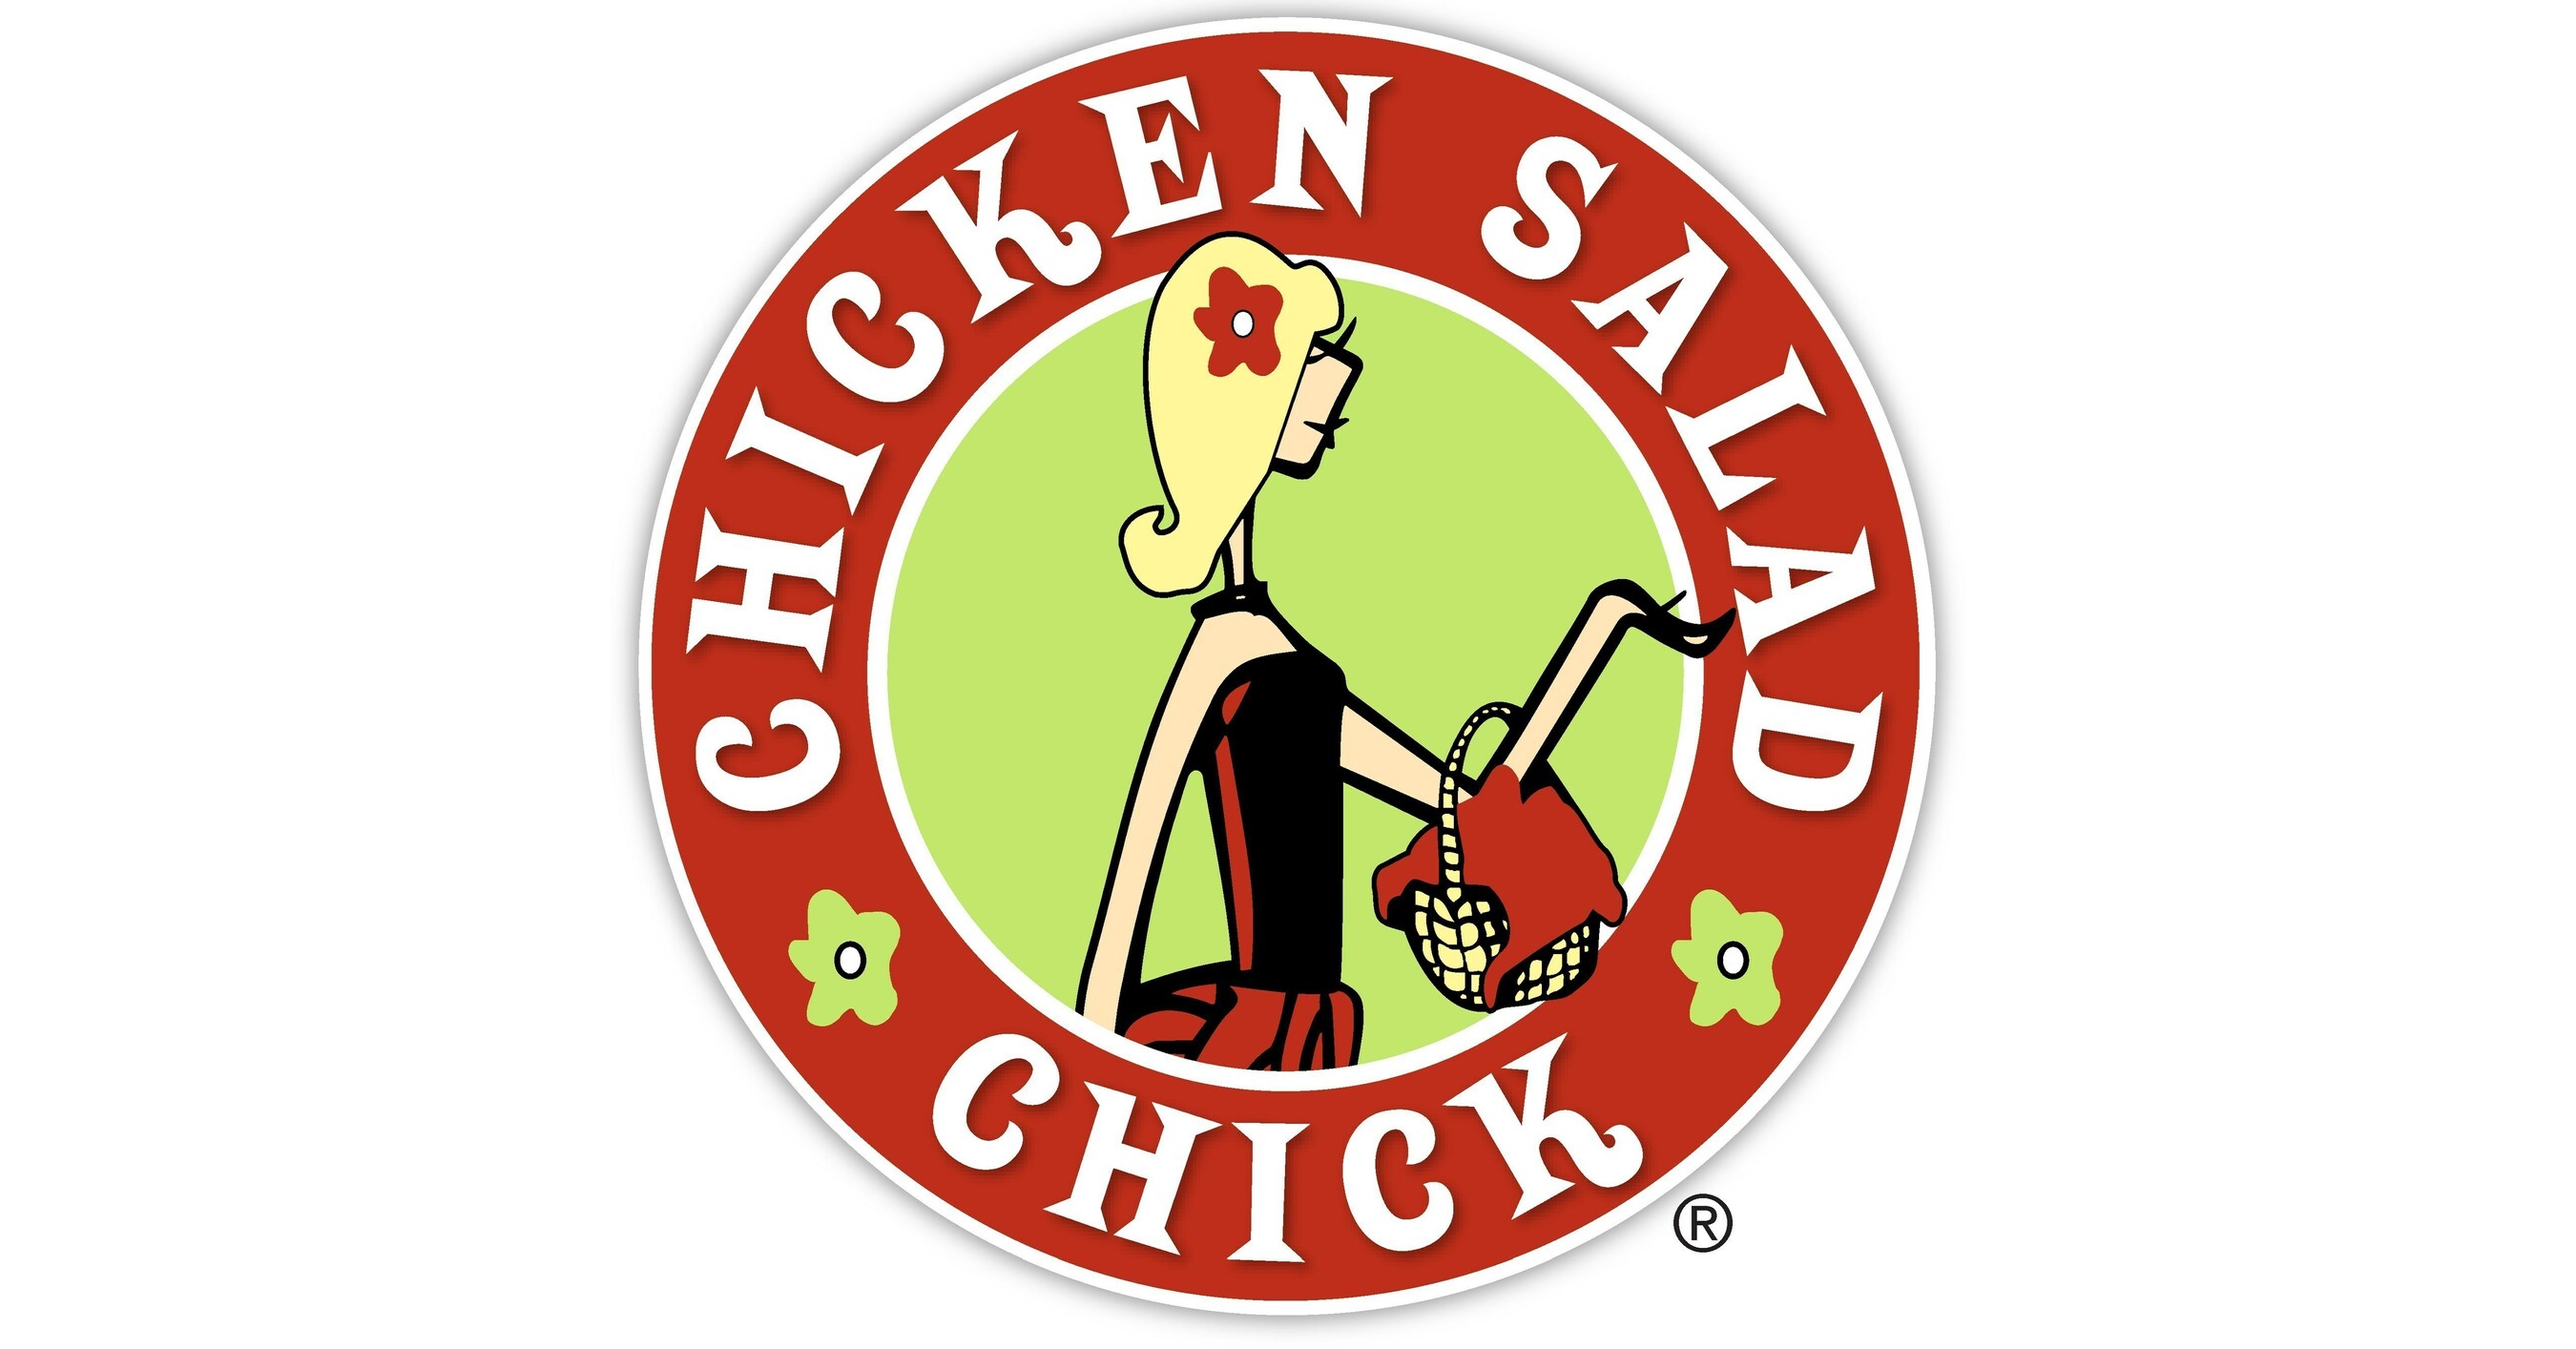  Chicken Salad Chick Announces Impressive Growth in the Lone Star State with 4 Multi-Unit Agreements 